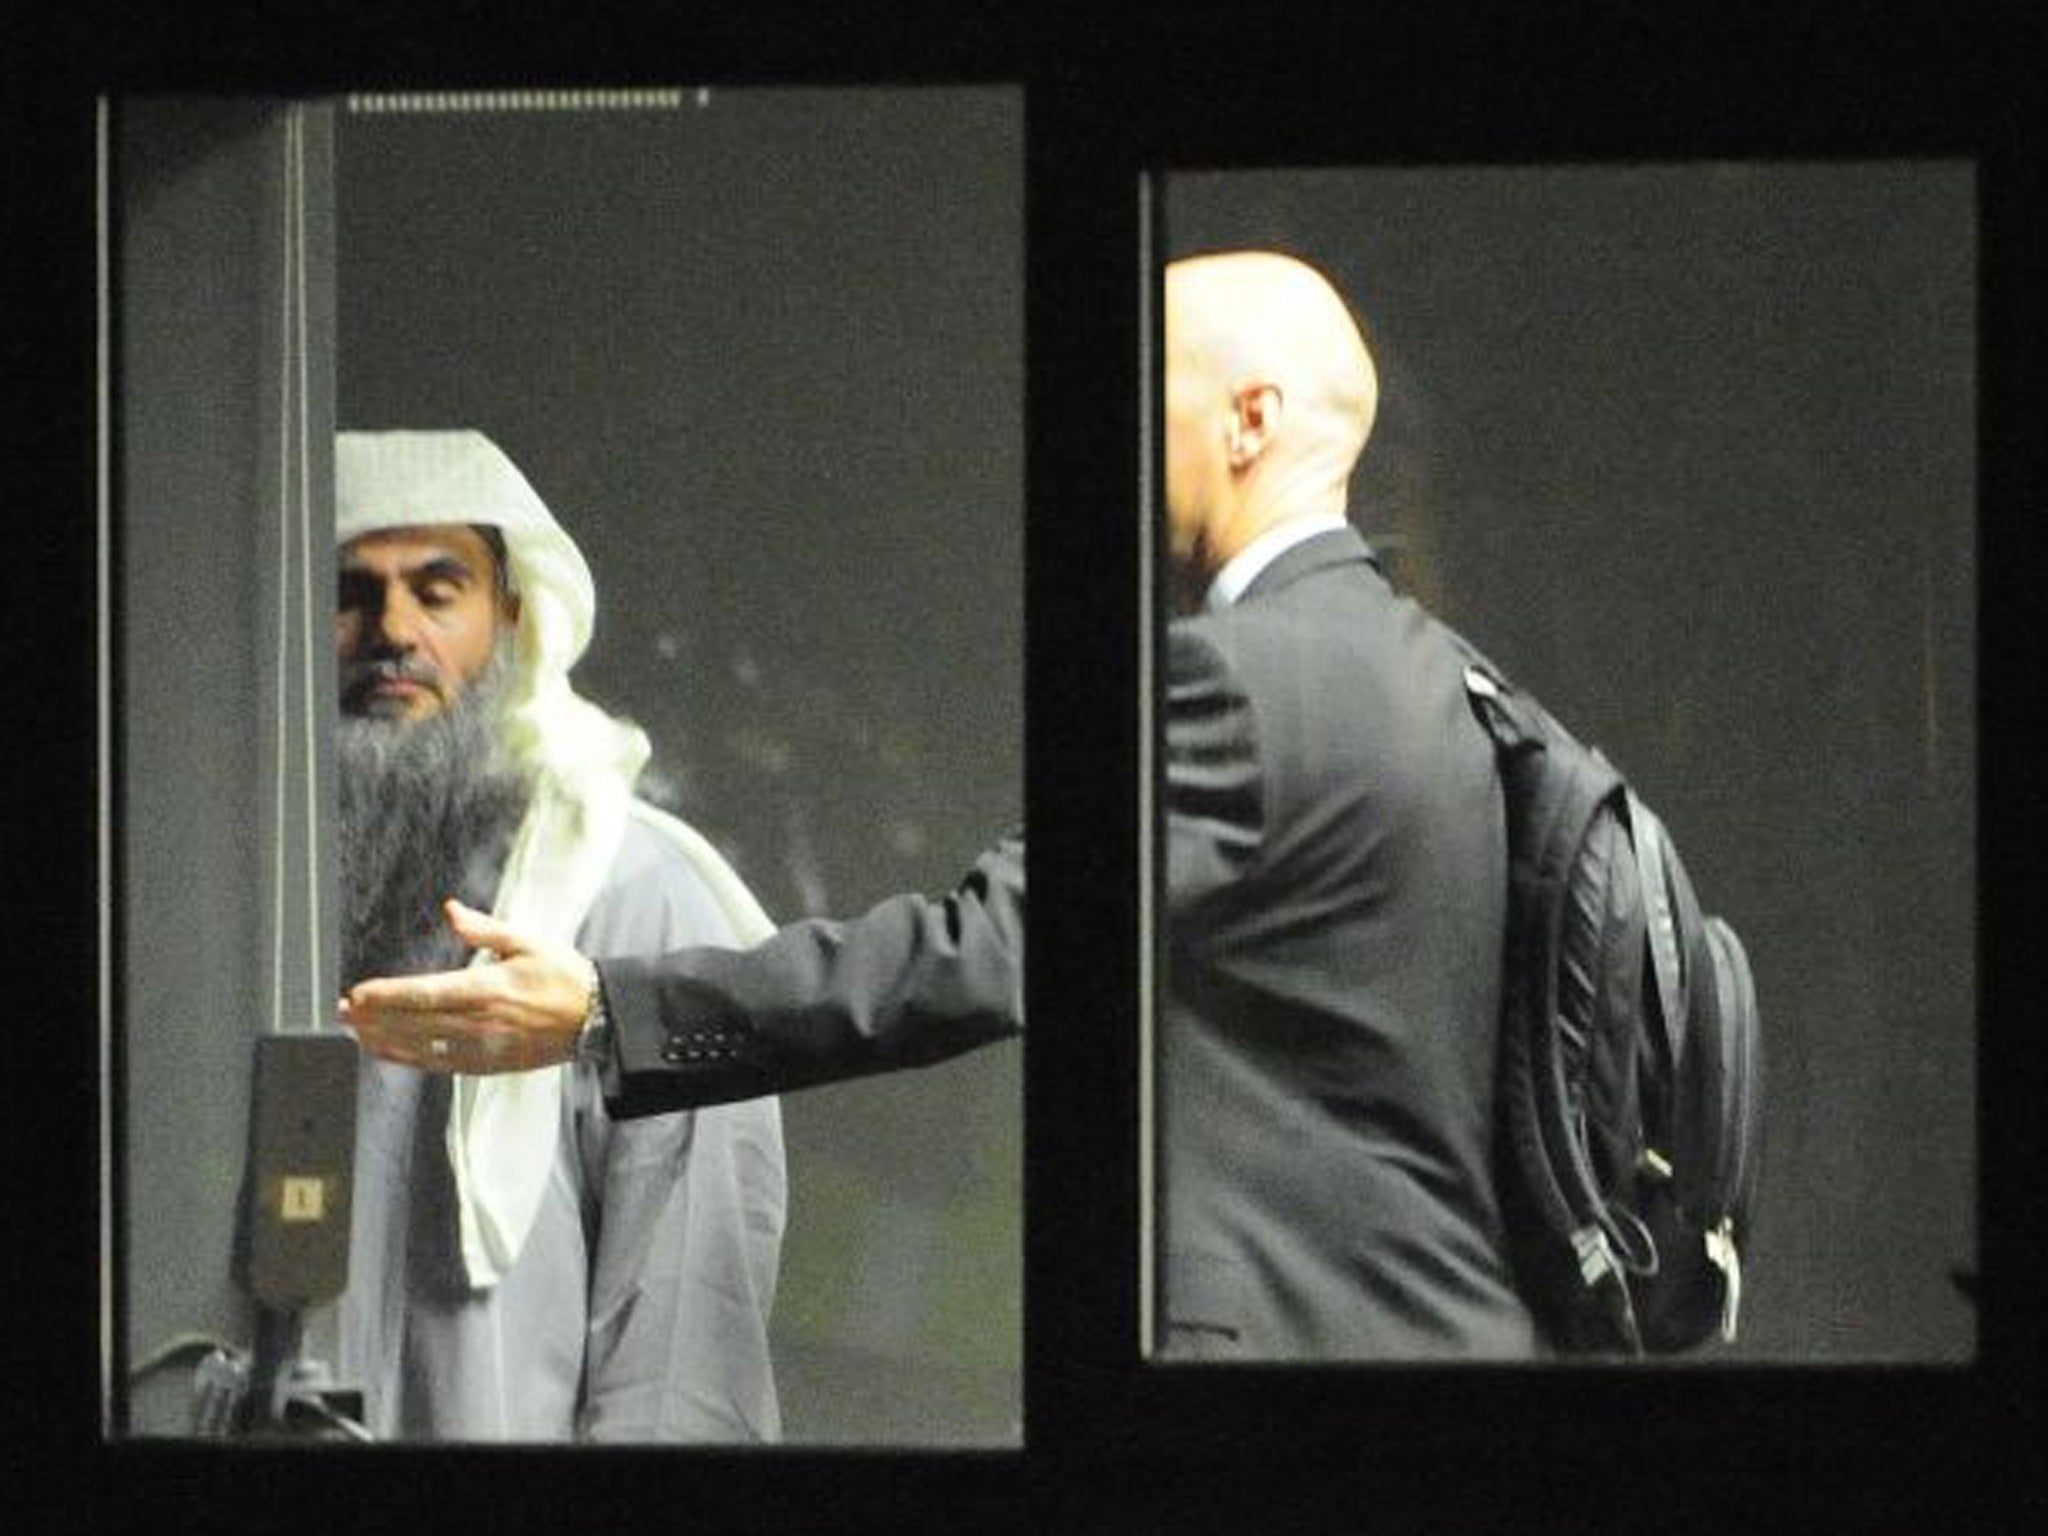 A photograph issued by the Ministry of Defence of Abu Qatada (left) at RAF Northolt in West London where he boarded a private flight bound for Jordan